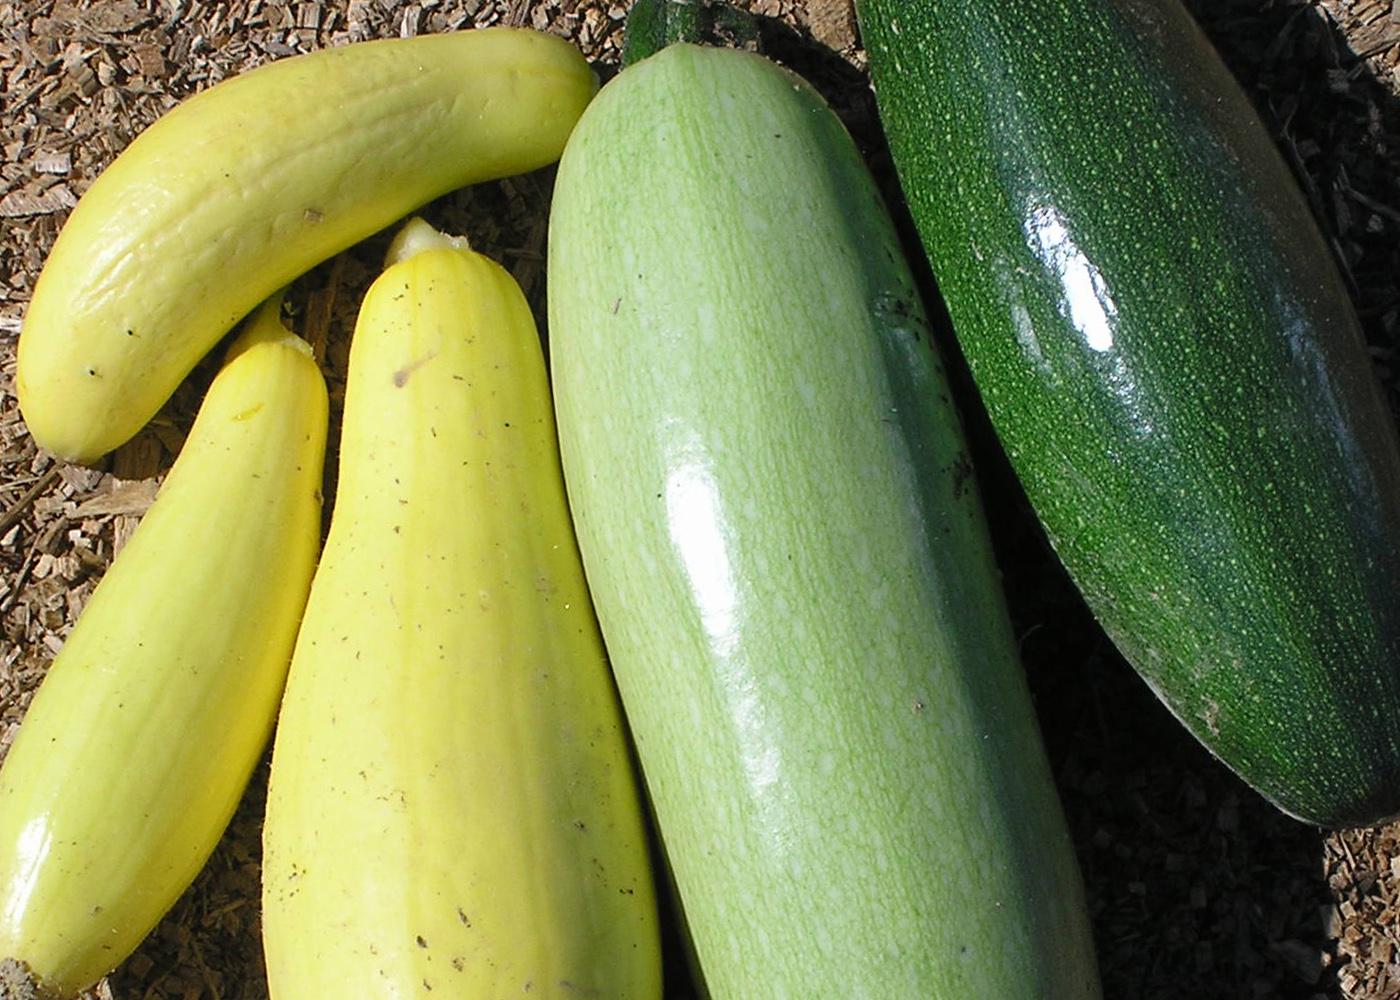 Resolve to grow a new vegetable this year. If you like traditional zucchinis, try growing a new variety in 2012. (Photo by Gary Bachman)